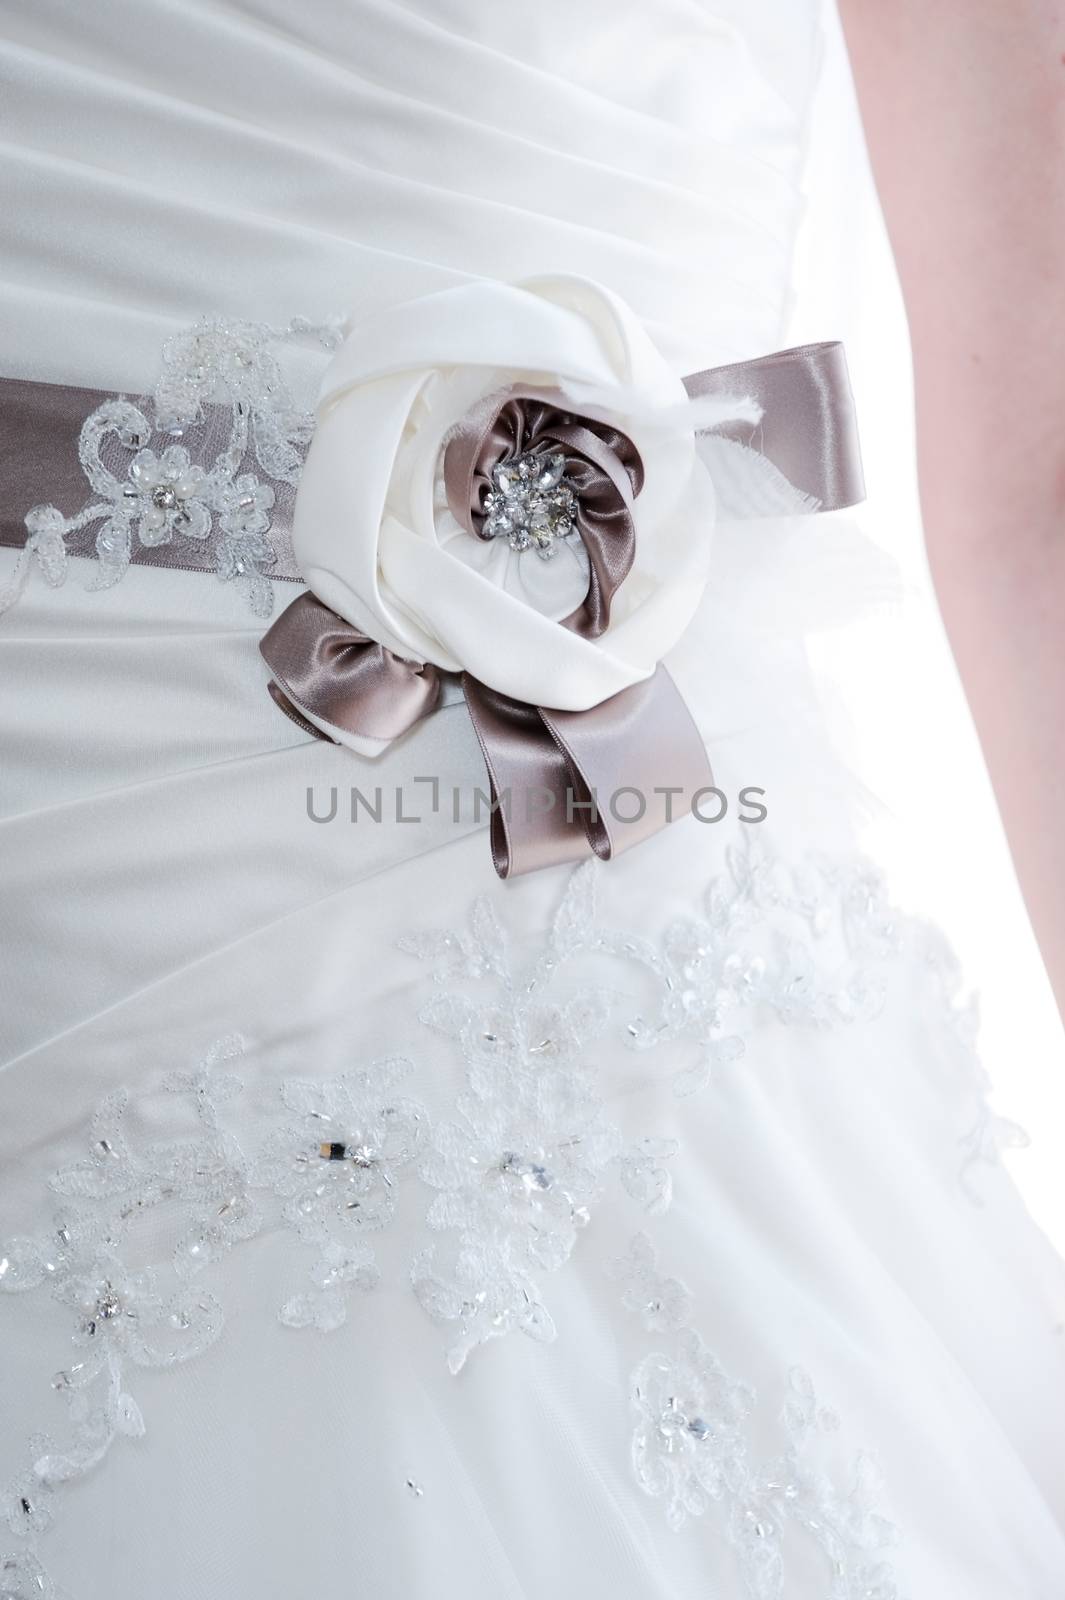 Closeup of brides floral dress detail on wedding day